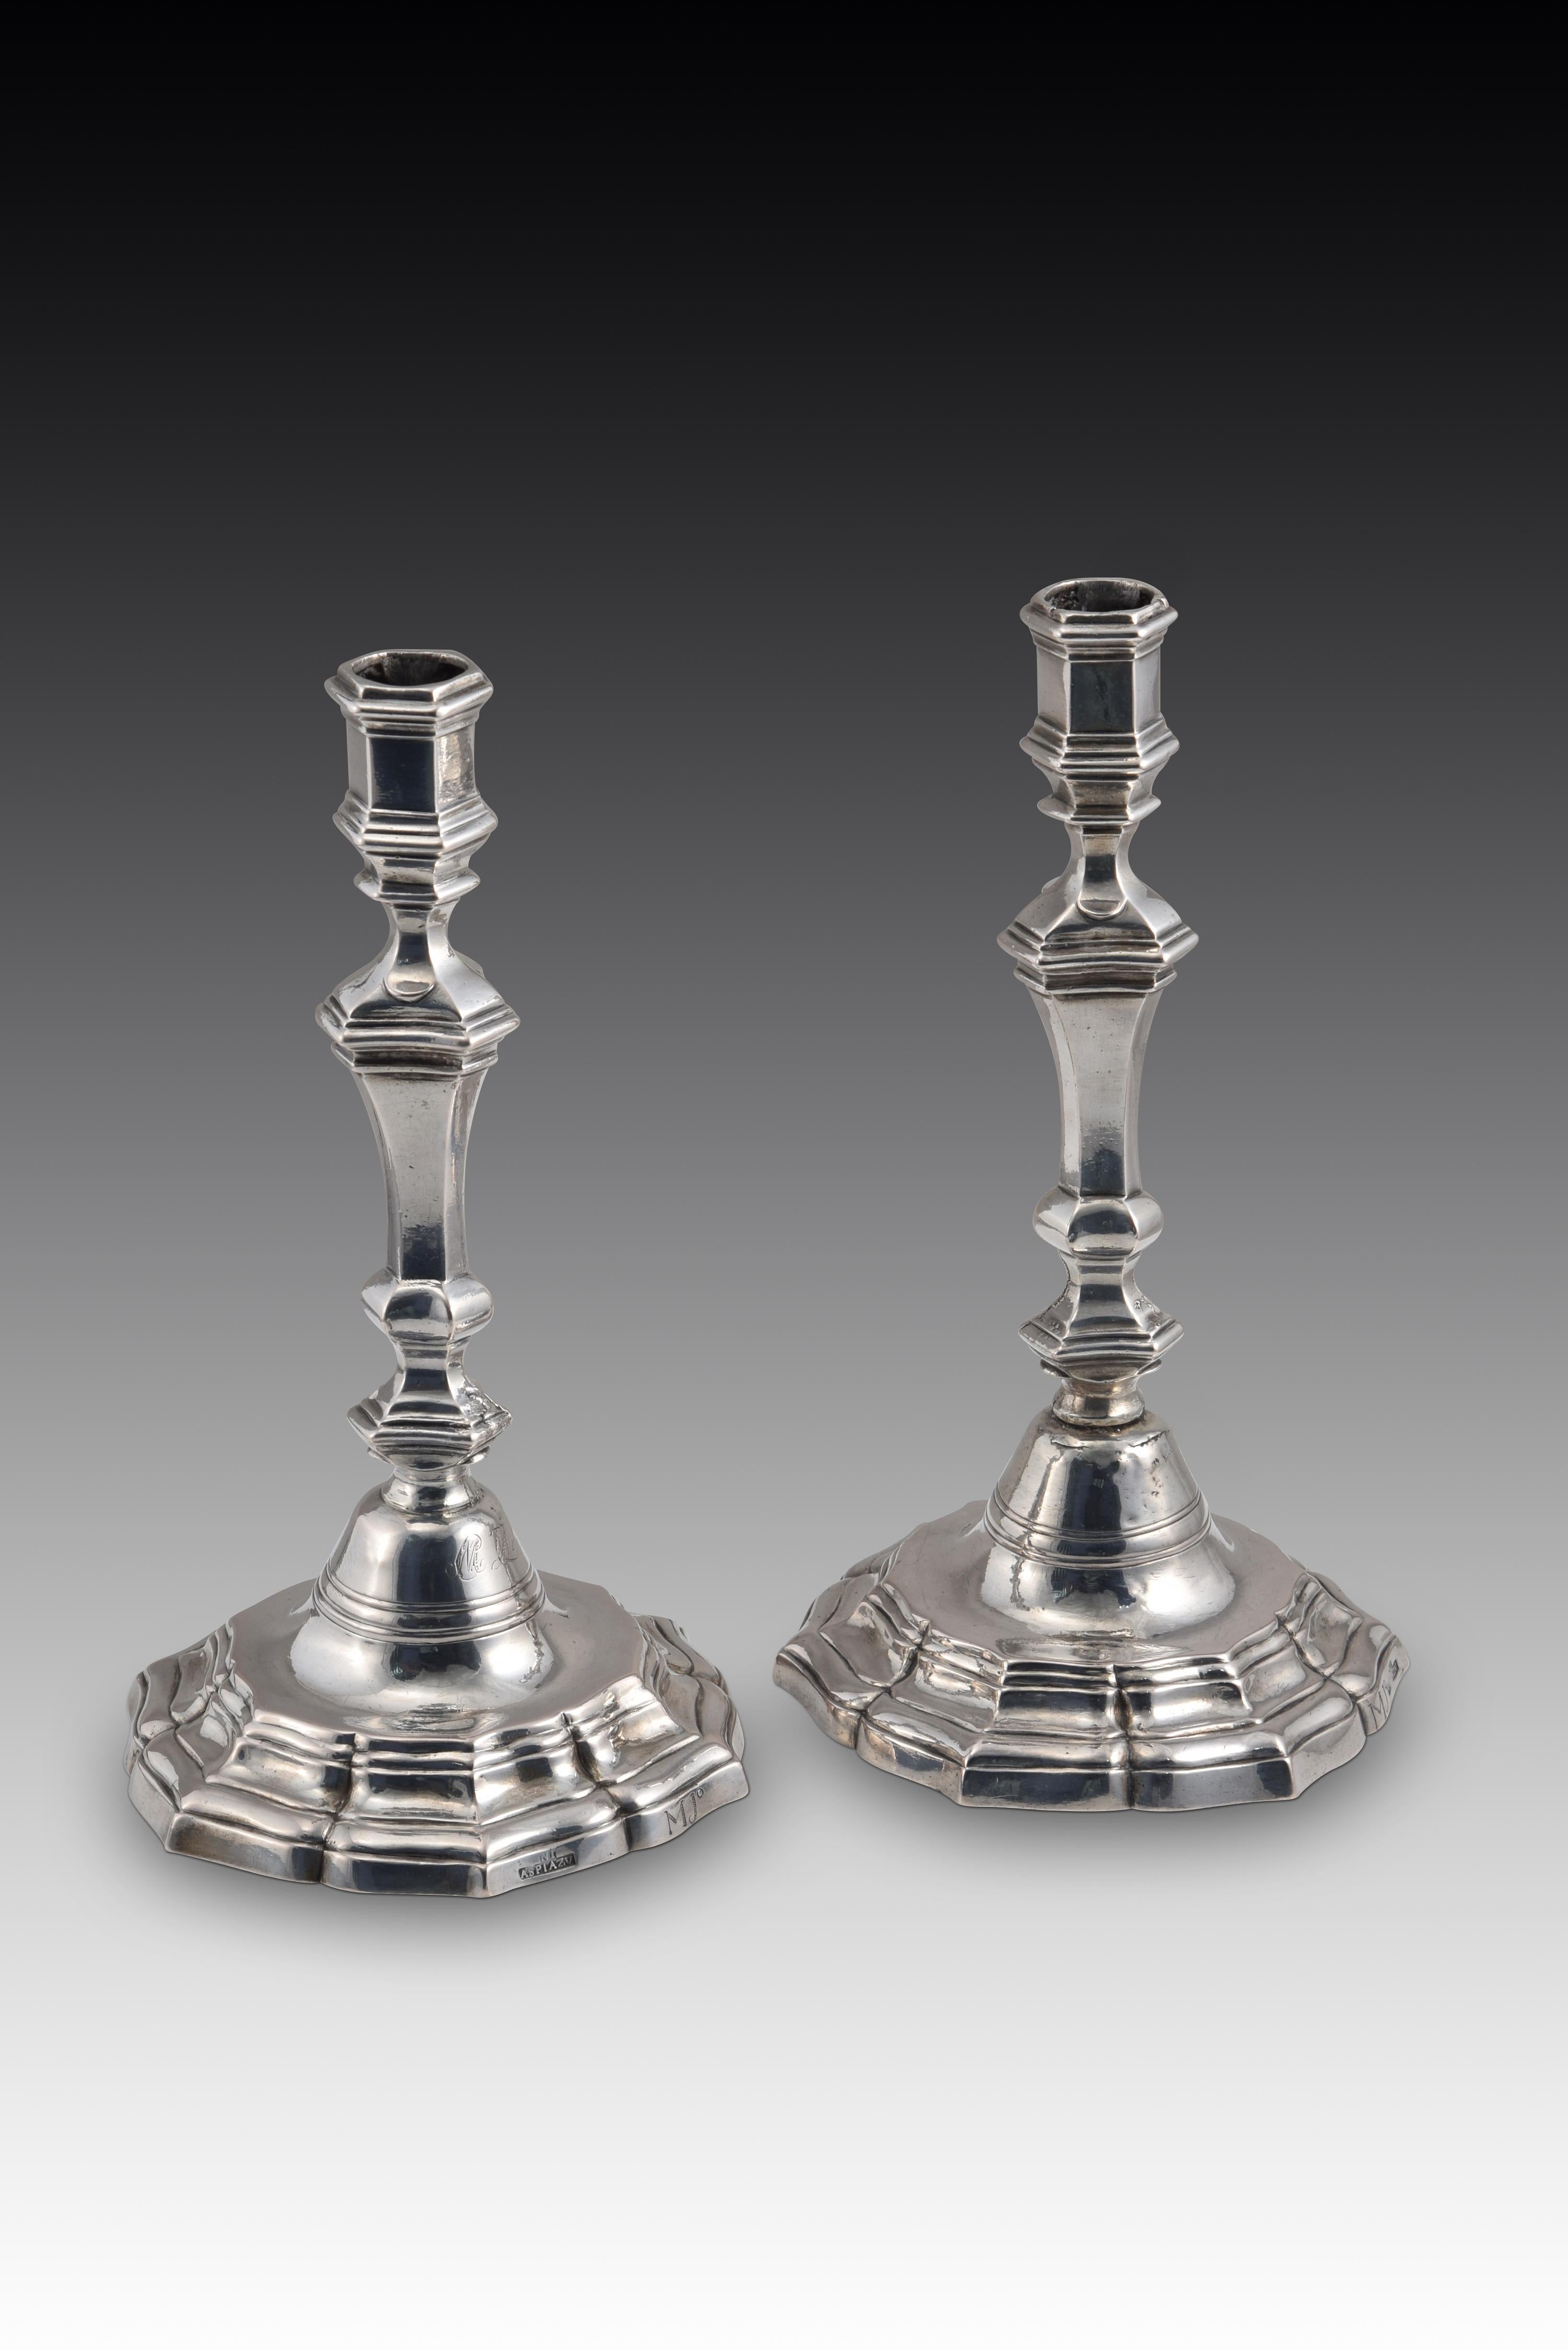 Pair of candlesticks. Silver in its color. ASPIAZU, Nicolás. San Sebastián, Spain, towards the end of the 18th century. 
With hallmarks and initials. 
Pair of silver candlesticks in their color with bases with a curved profile, combining different